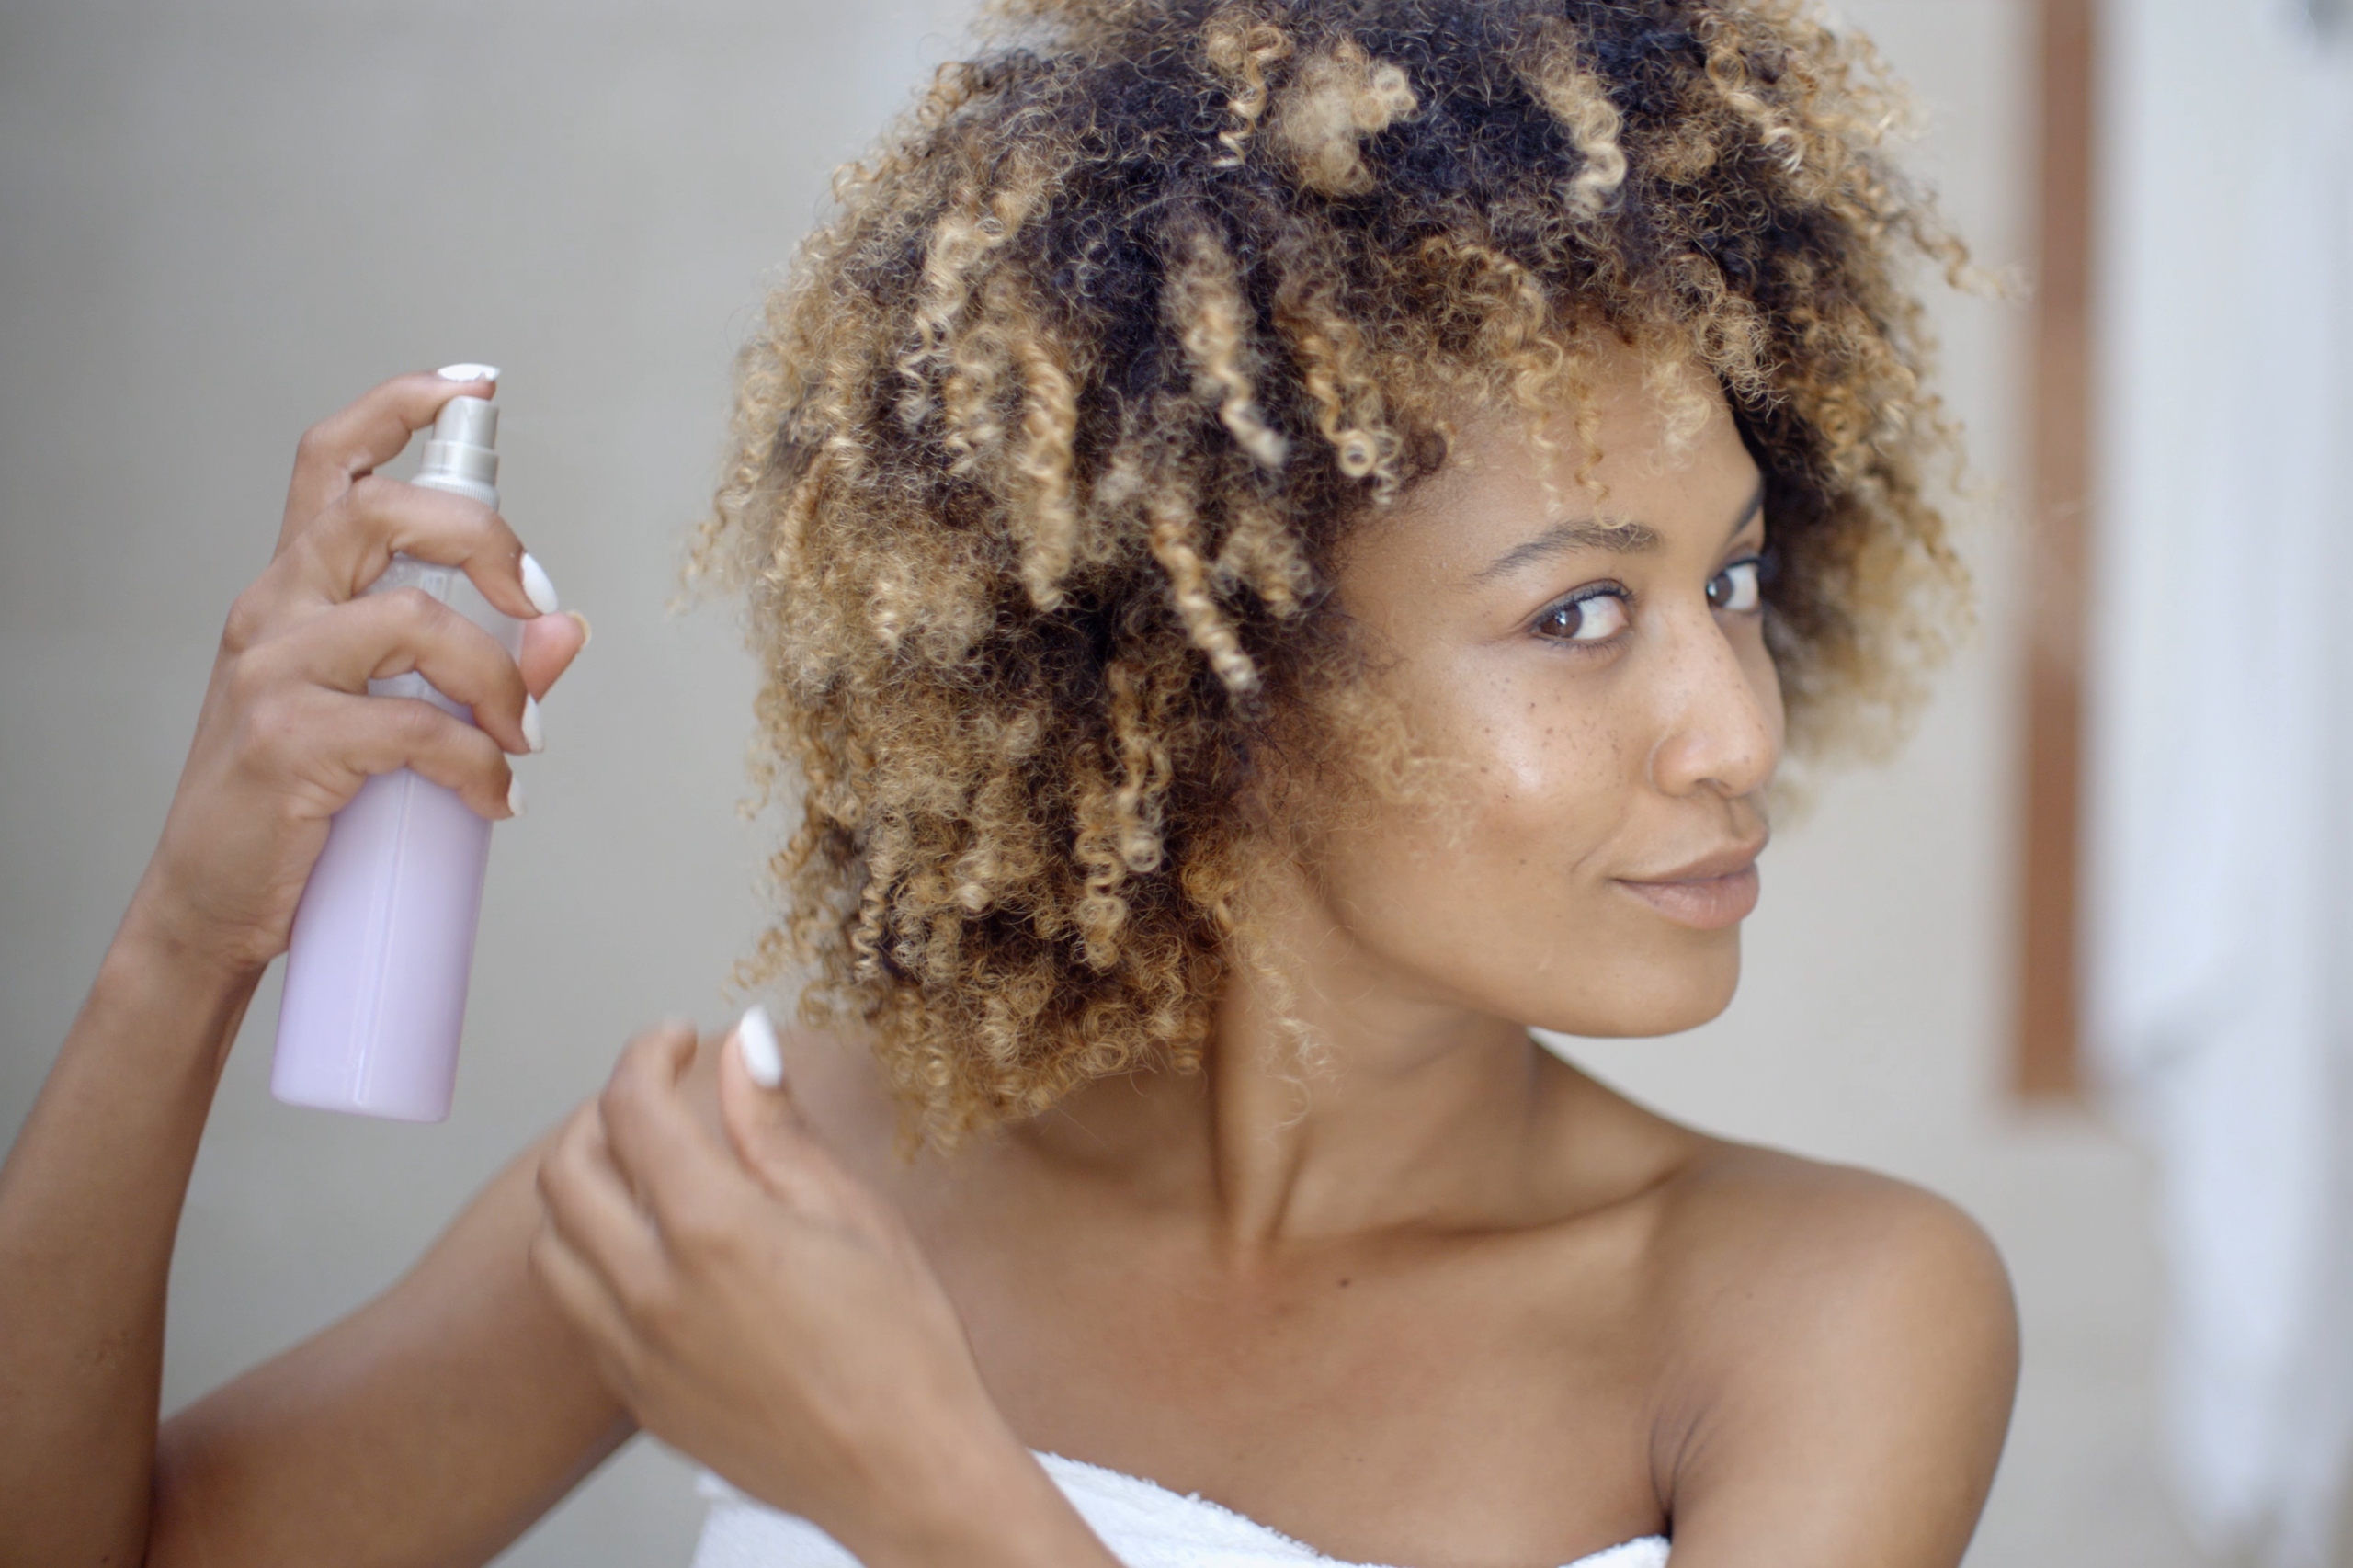 The question 'is salt water good for your hair?' is answered